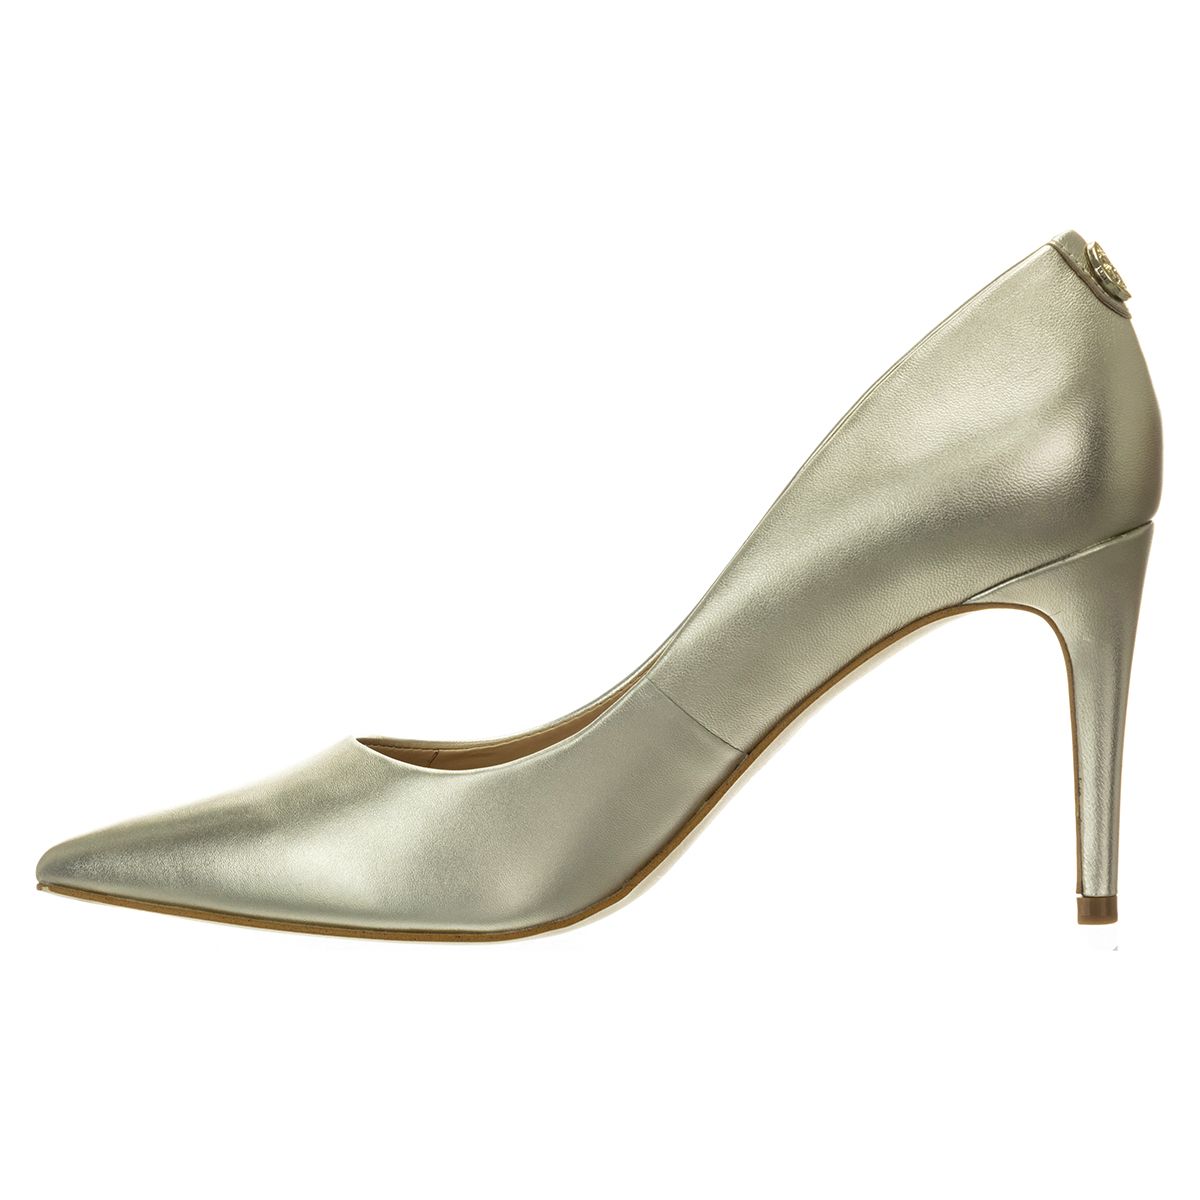 Guess FL5BE5LEM08-PLATI-40 These silver décolleté shoes will surely brighten up your elegant looks.